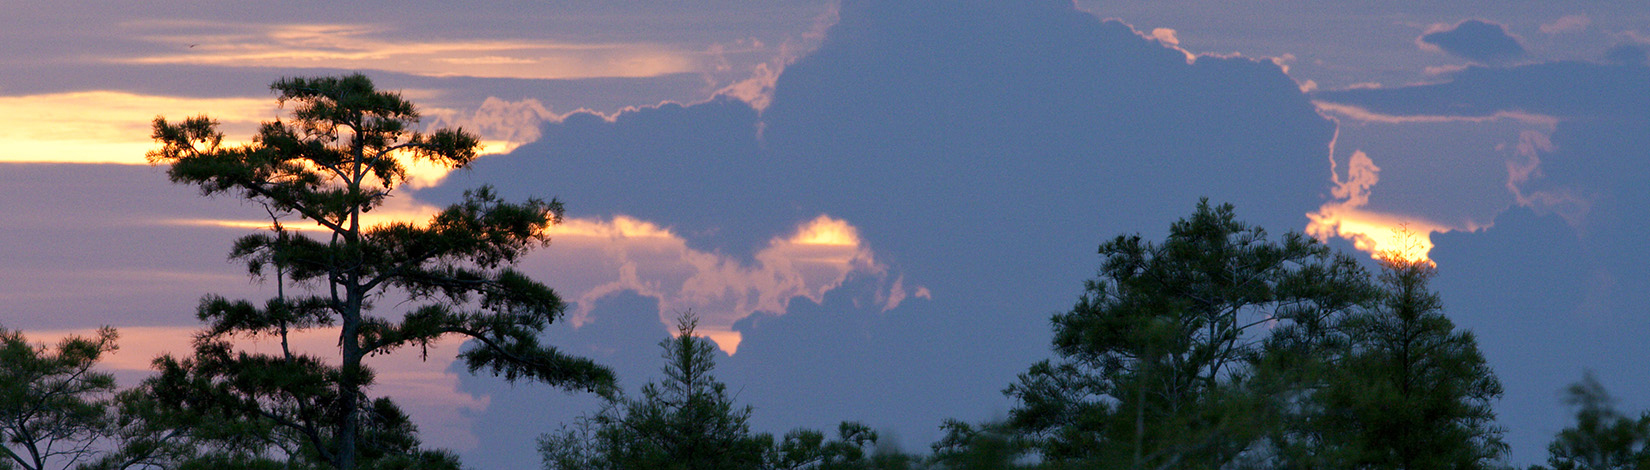 Natural Florida skyline with storm clouds in the distance